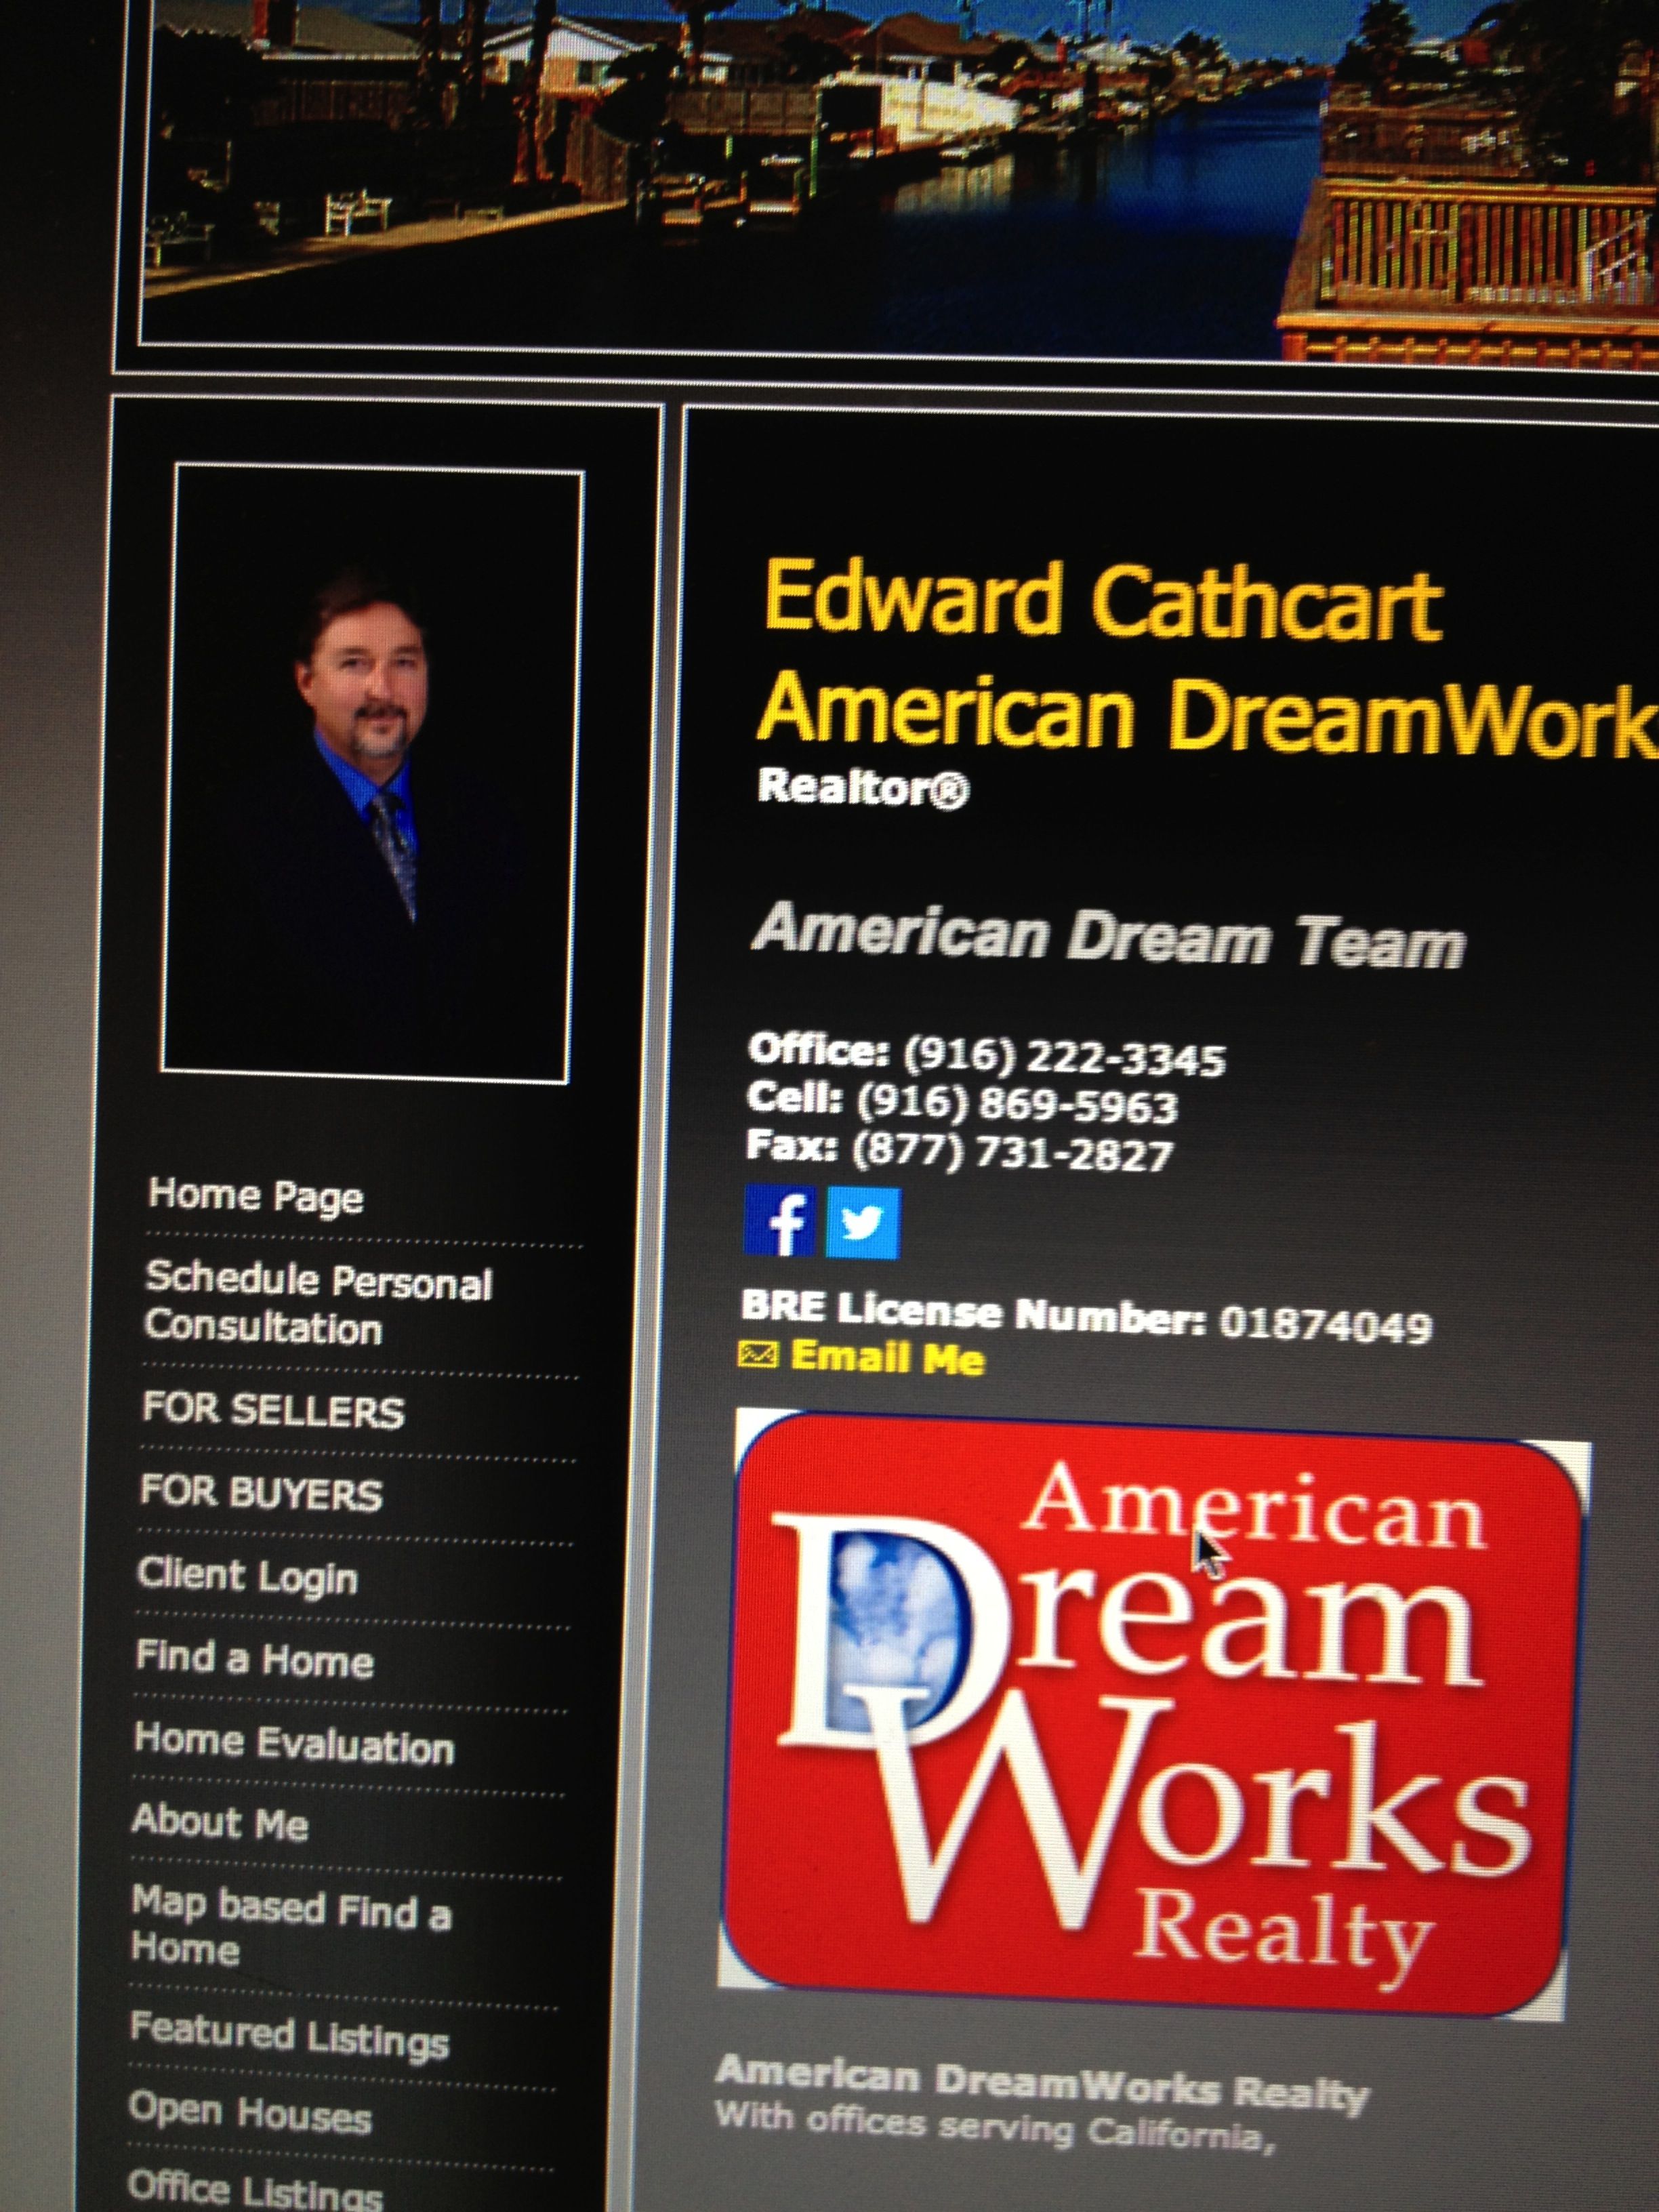 Ed Cathcart - Intimidates, Blackmails with the intent to extort.